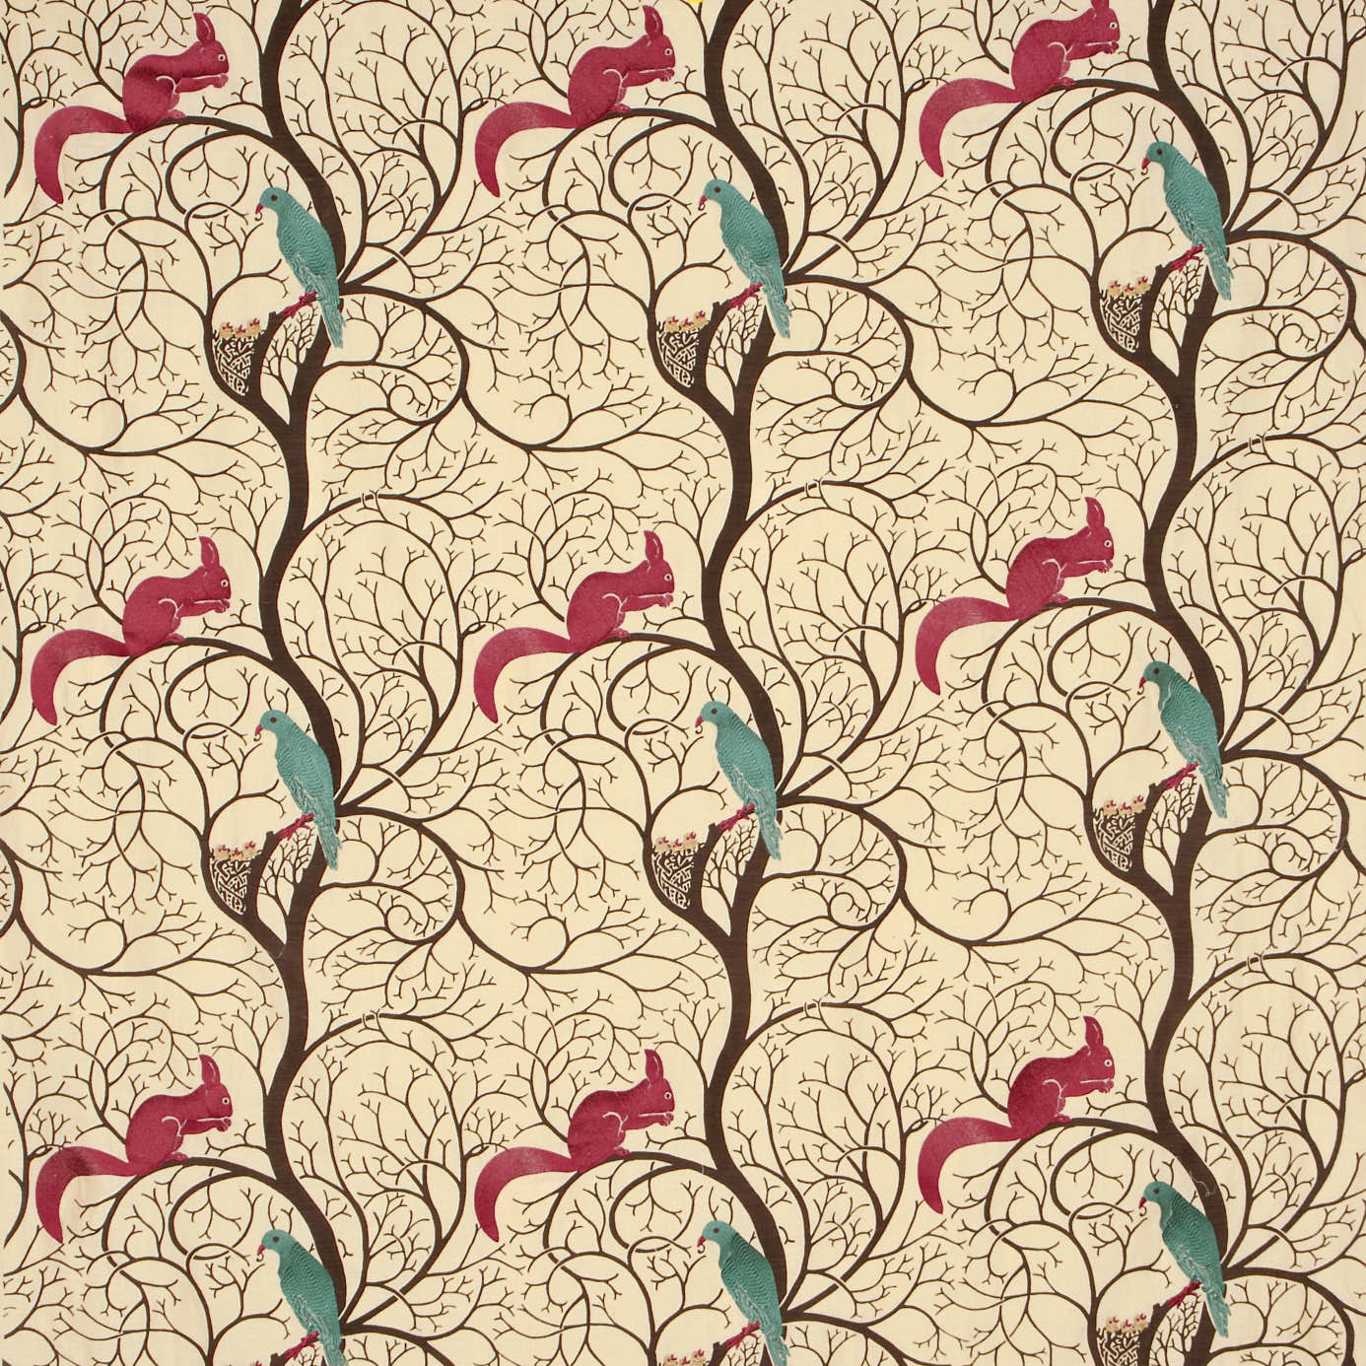 Squirrel & Dove Teal/Red Fabric by SAN